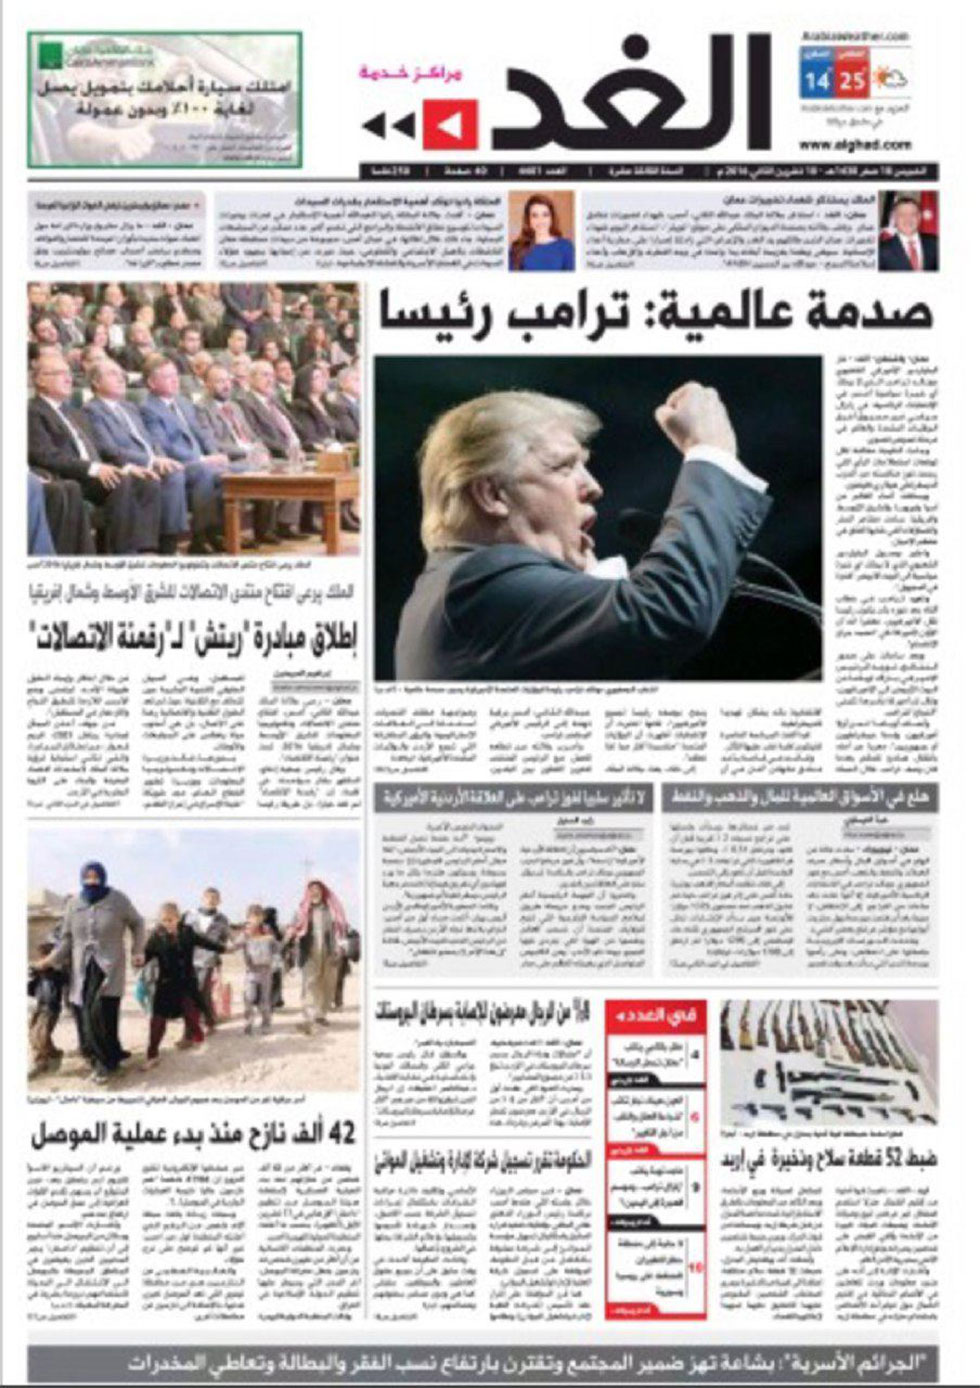 Frontpage of Al-Ghad: World shocked: Trump President